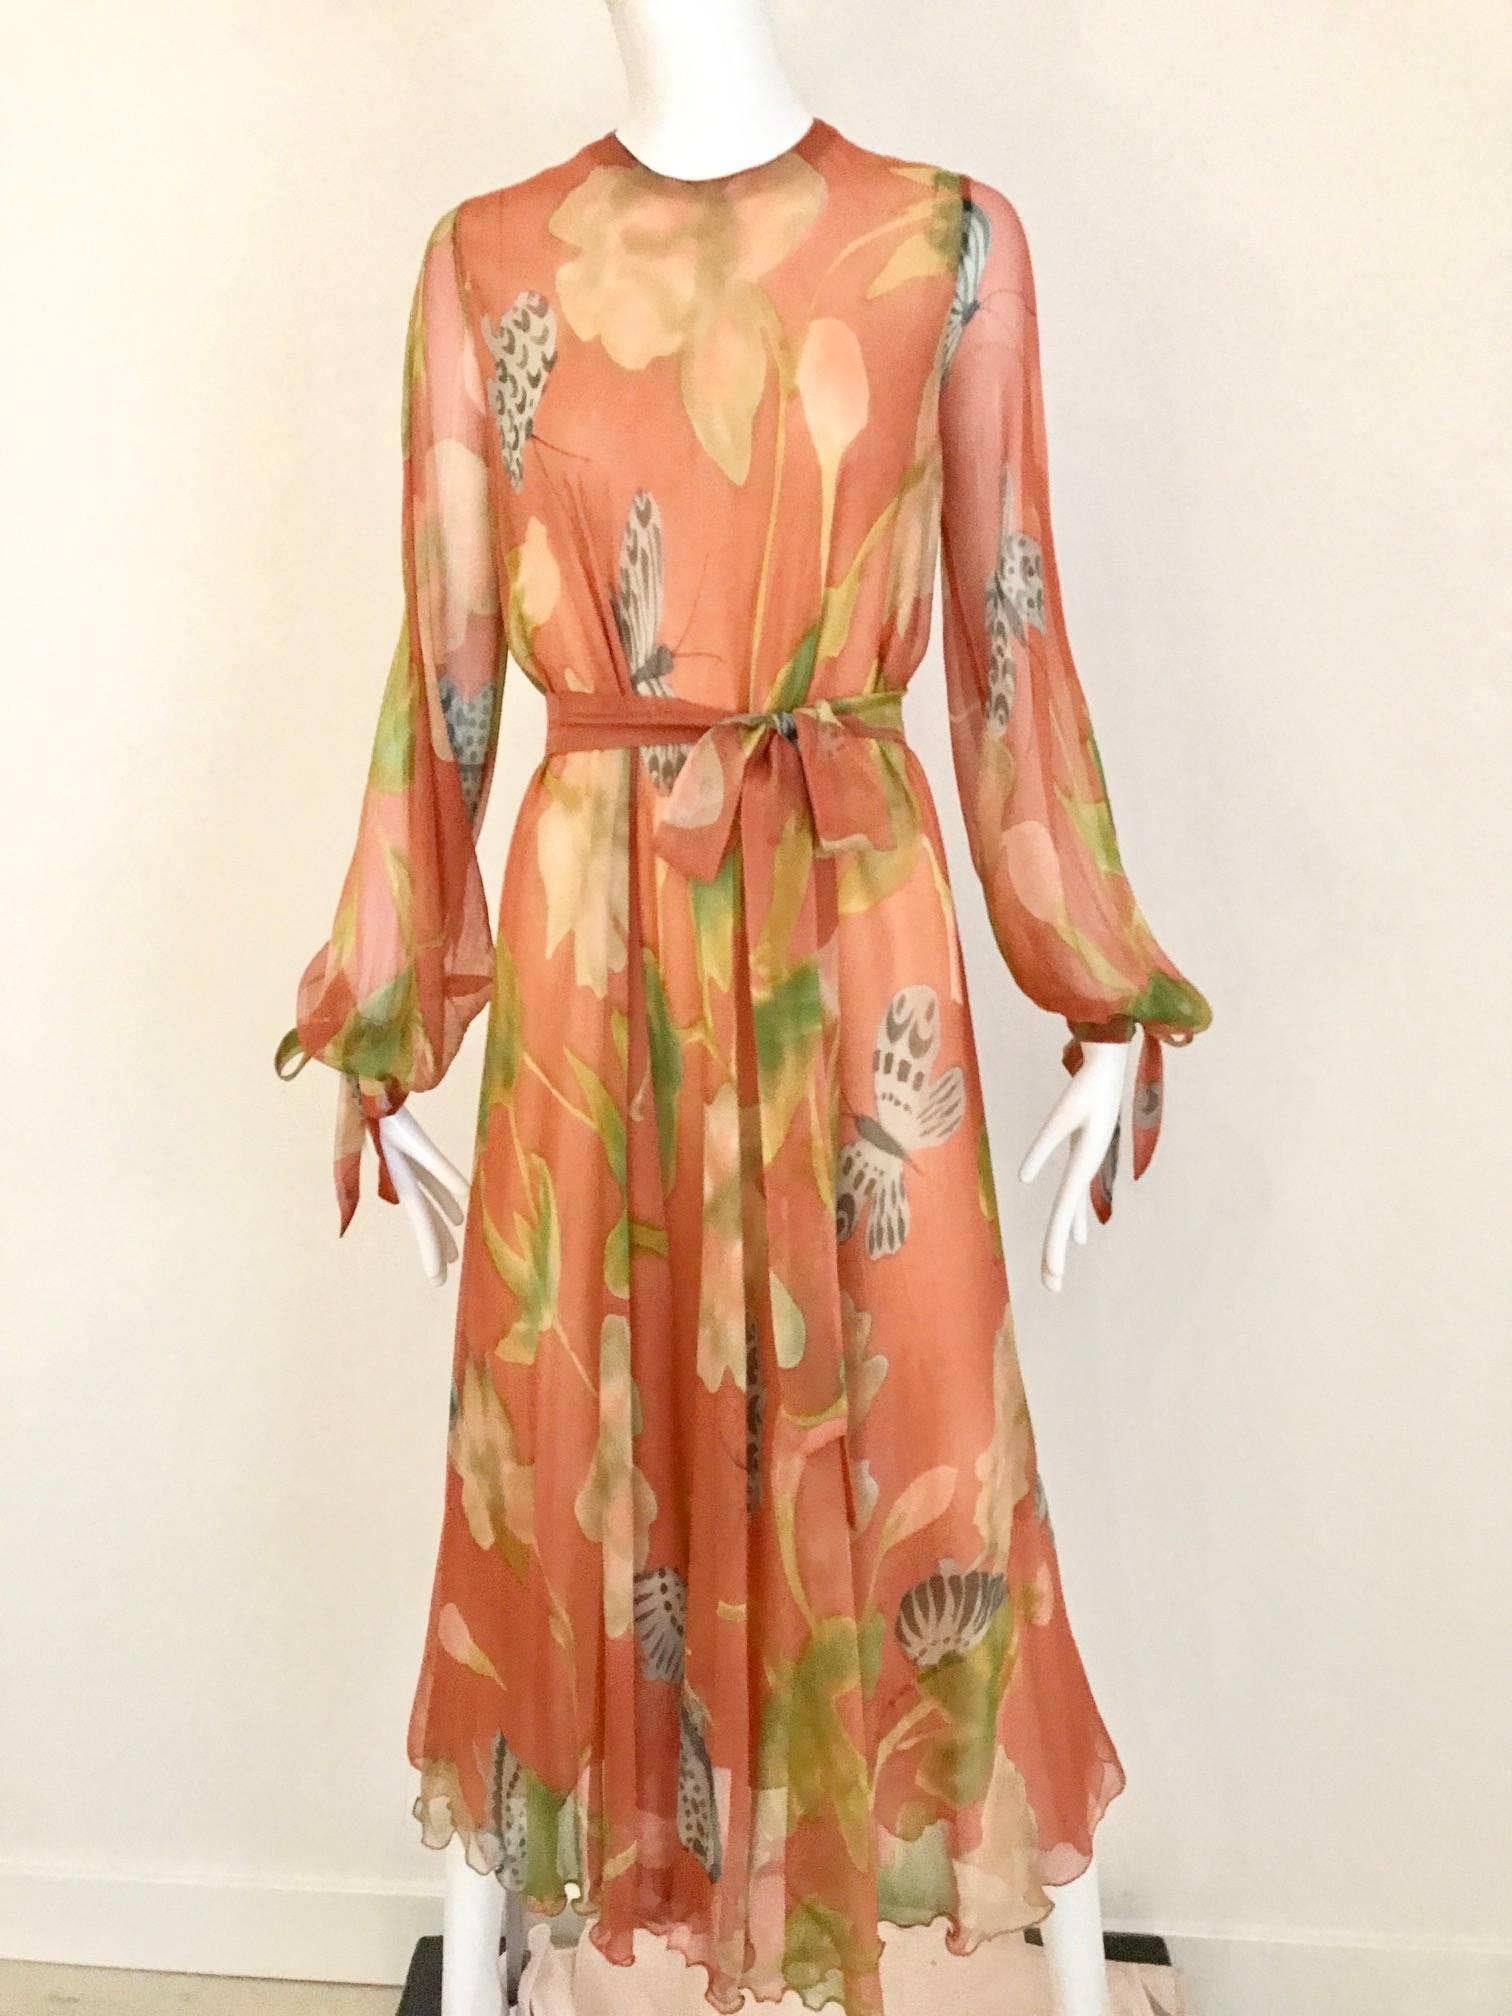 This 1970s Anna Weatherly bohemian beauty is silk chiffon with long sleeves with long sash ties. It has a detachable ruffle collar that can be used to create excitement around the neck. Anna Weatherly is known for her elaborate botanical hand